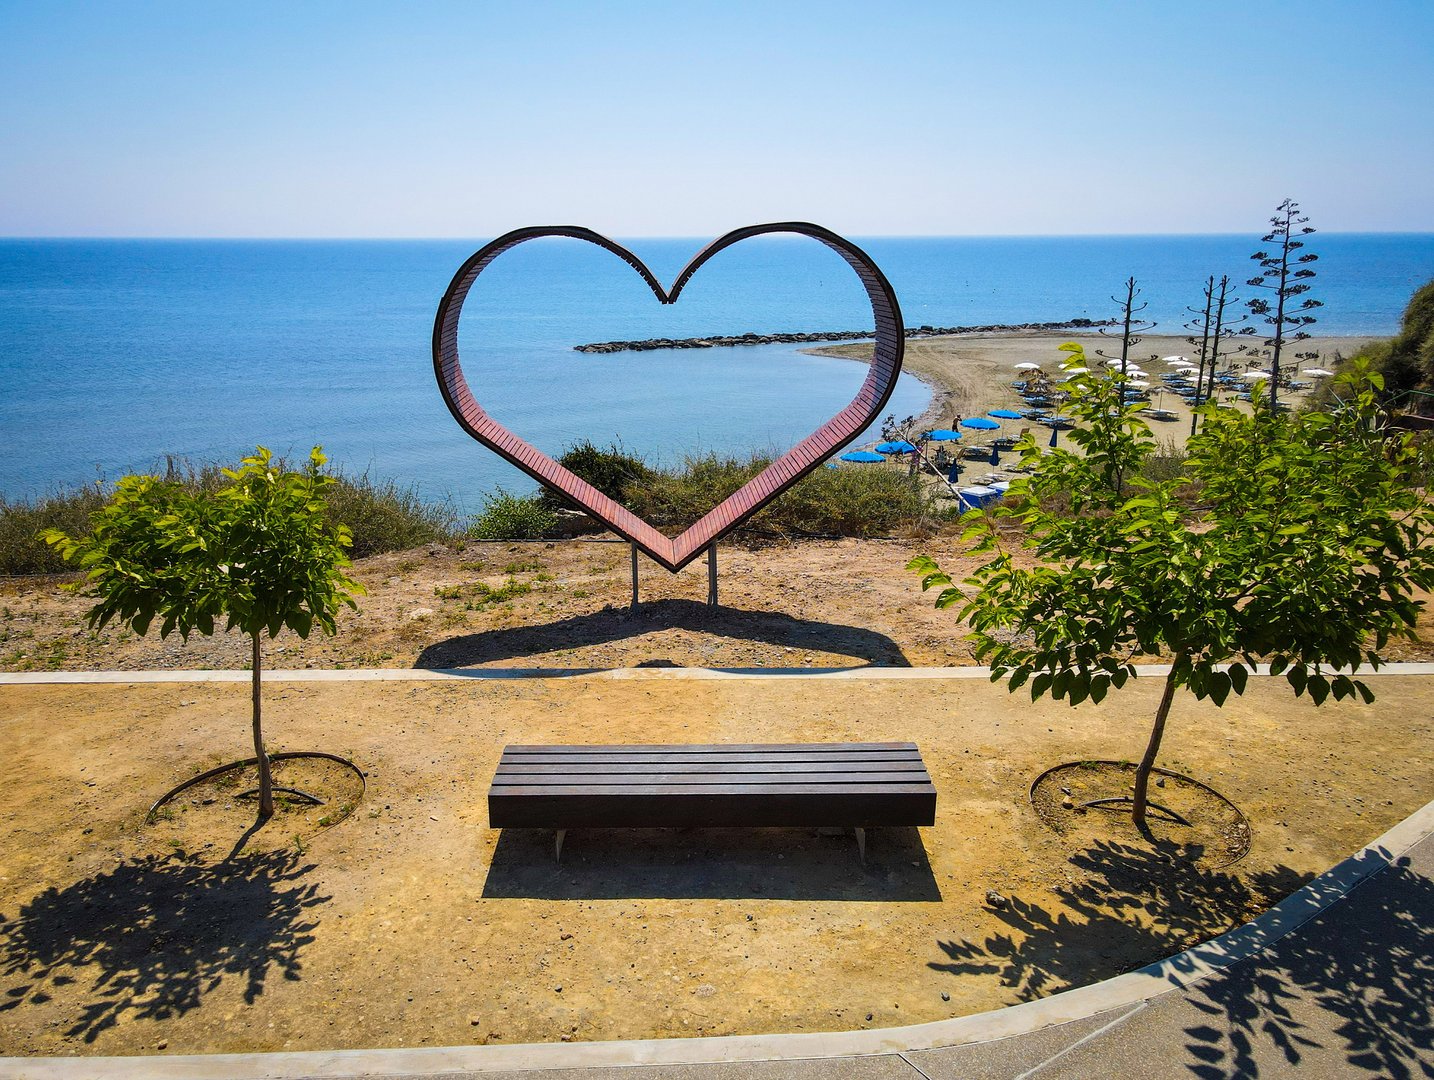 image ‘Larnaca enriched its tourism product in leaps and bounds in 2022’